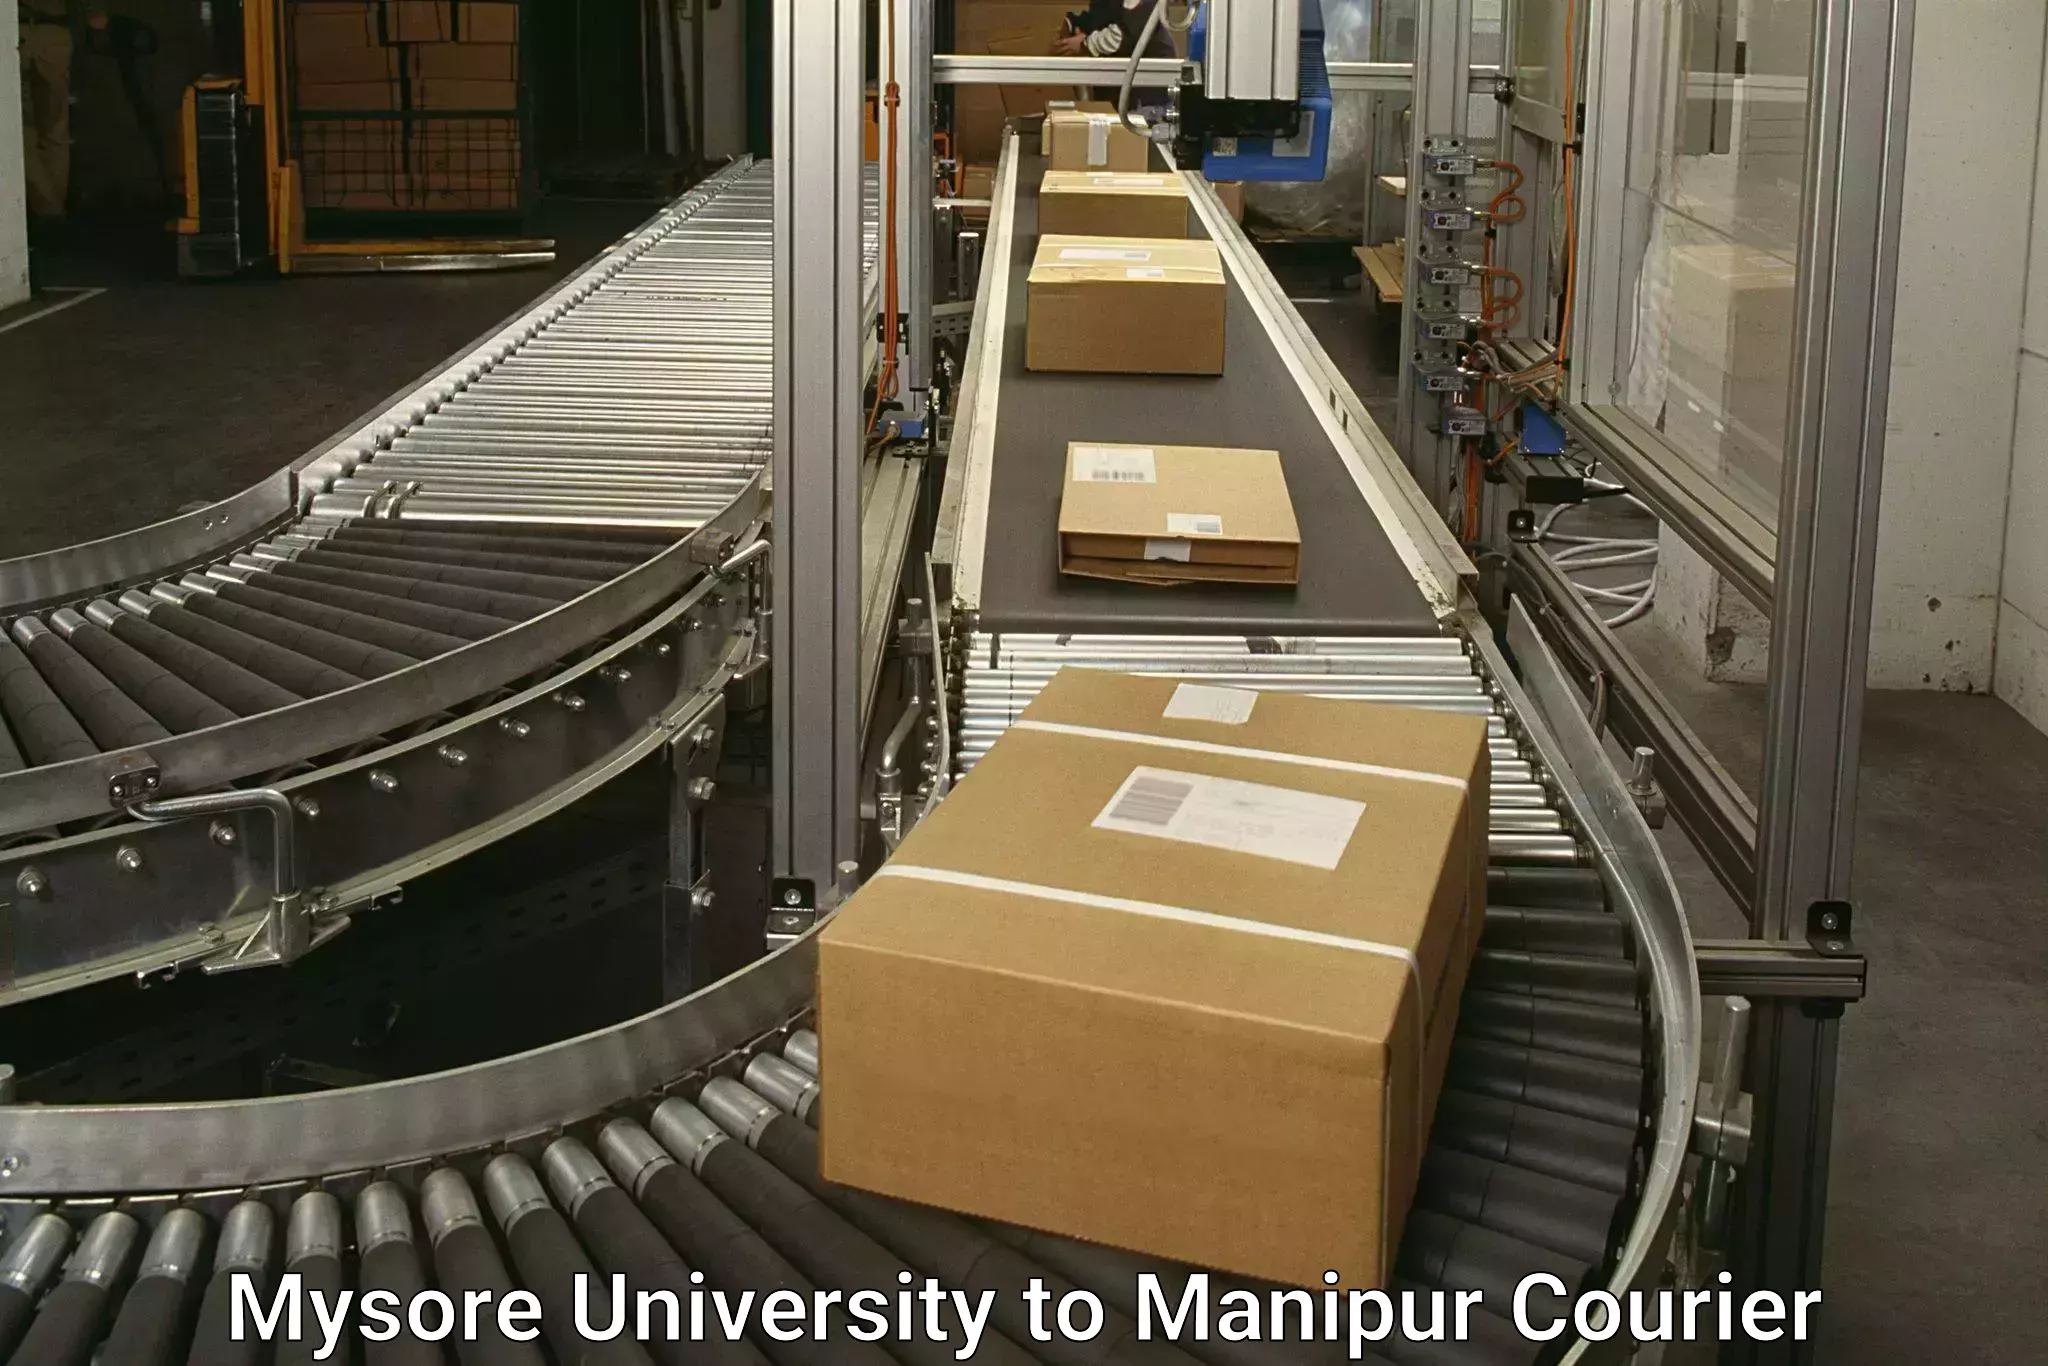 Easy access courier services Mysore University to Manipur